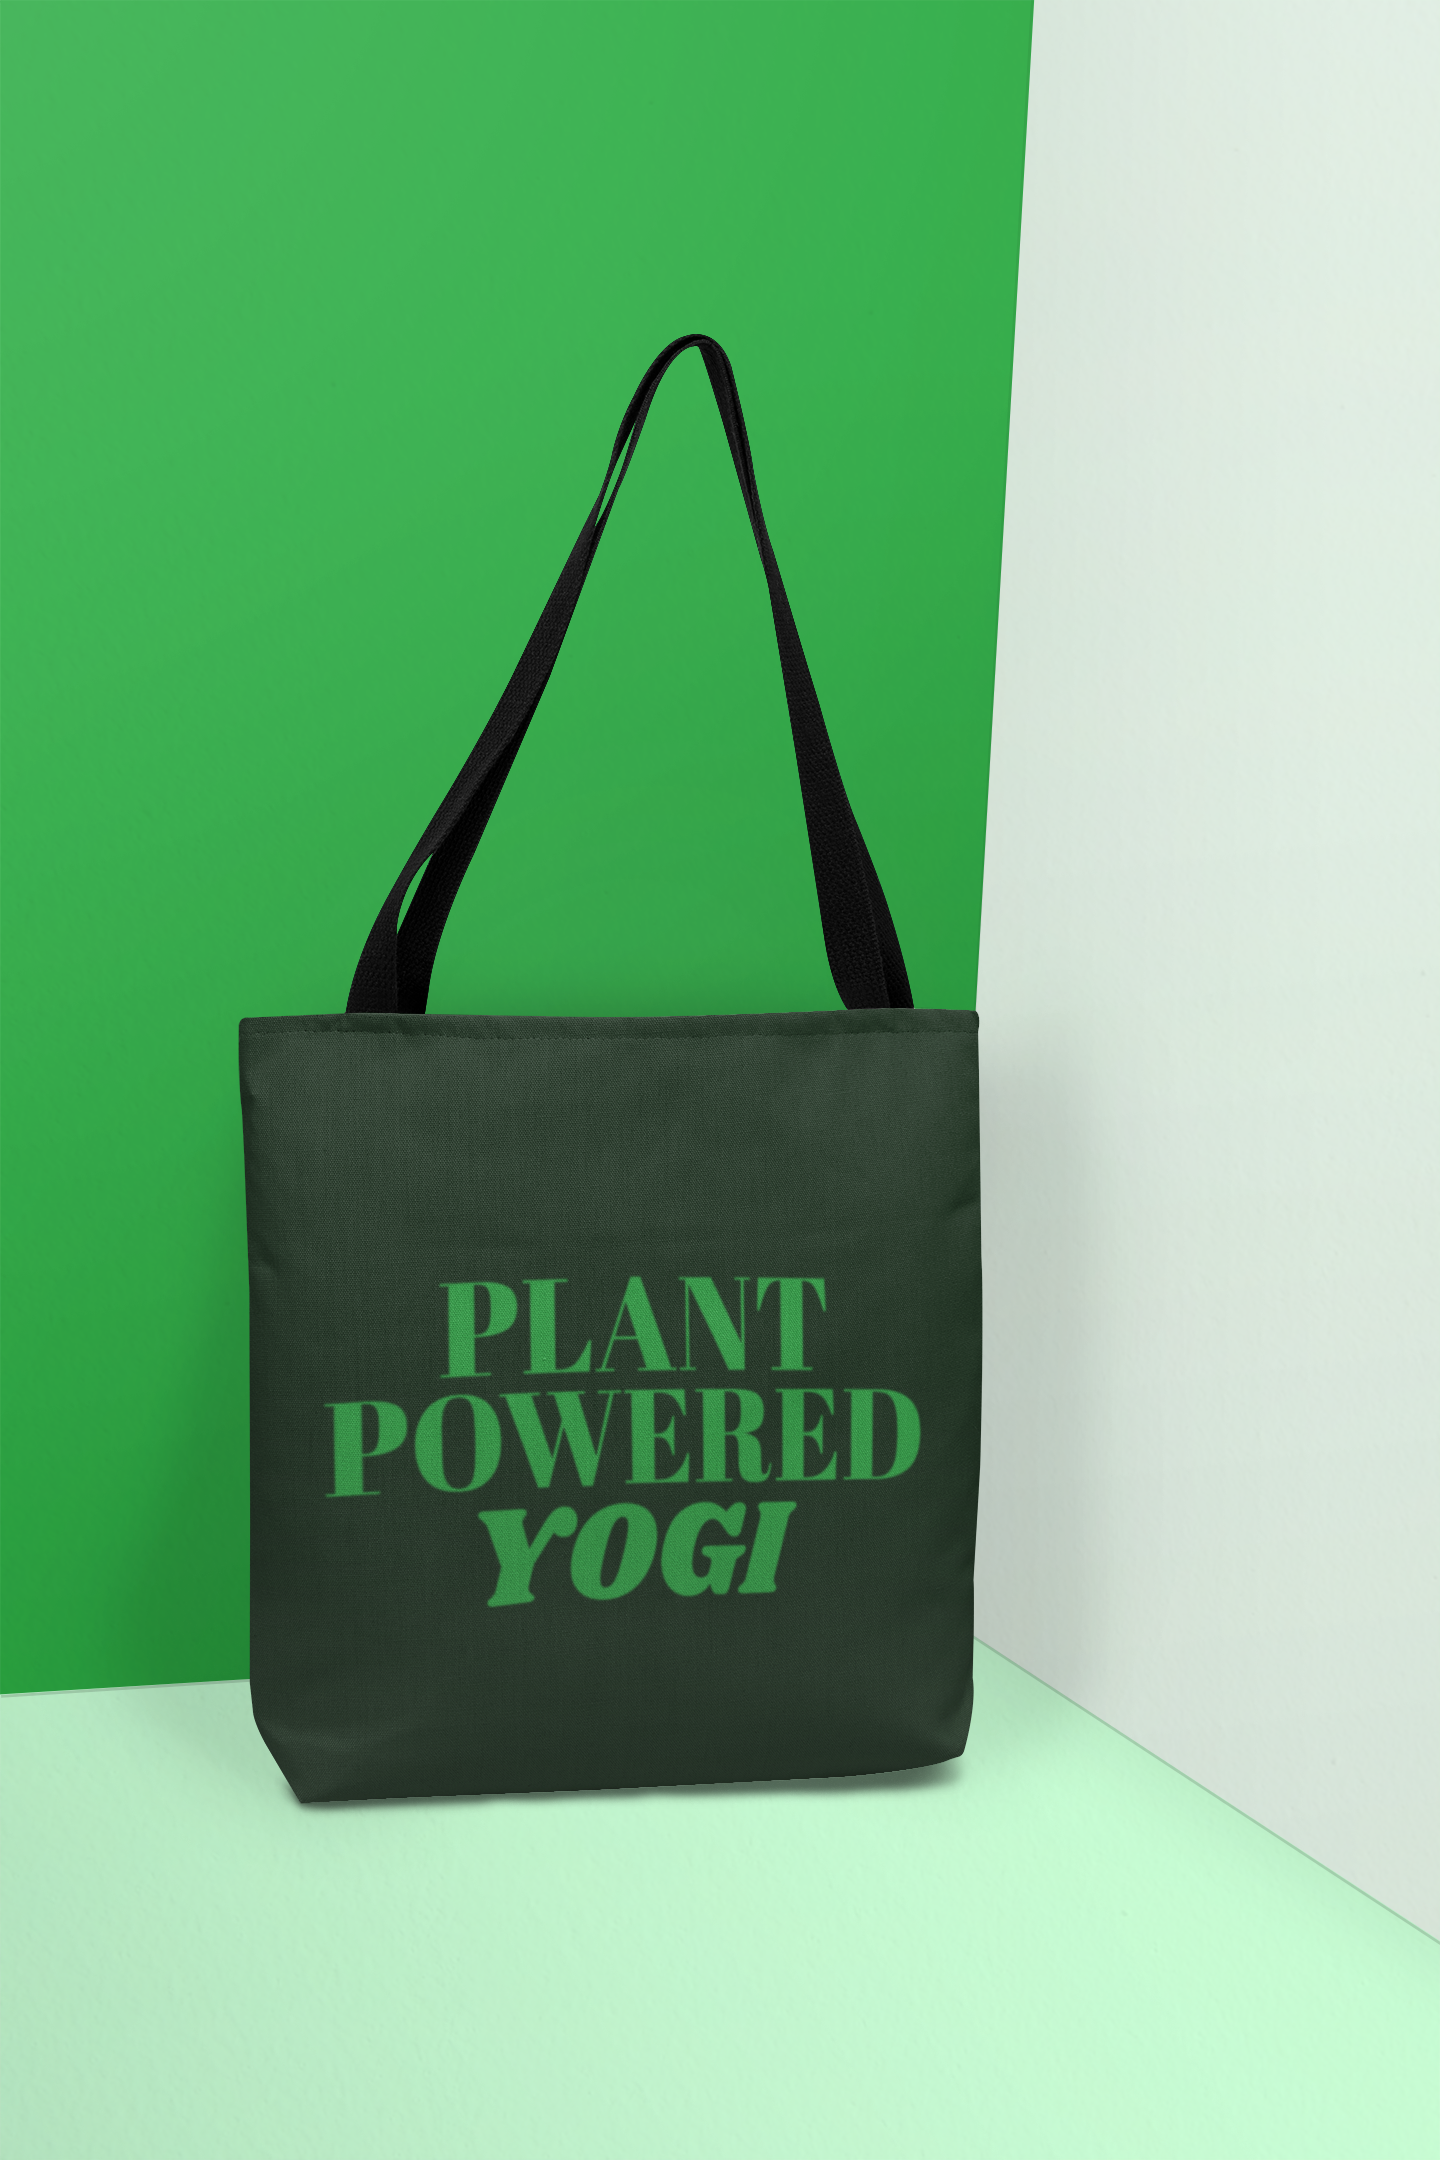 The Plant Powered tote bag. Created by Yoga and Mahogany.